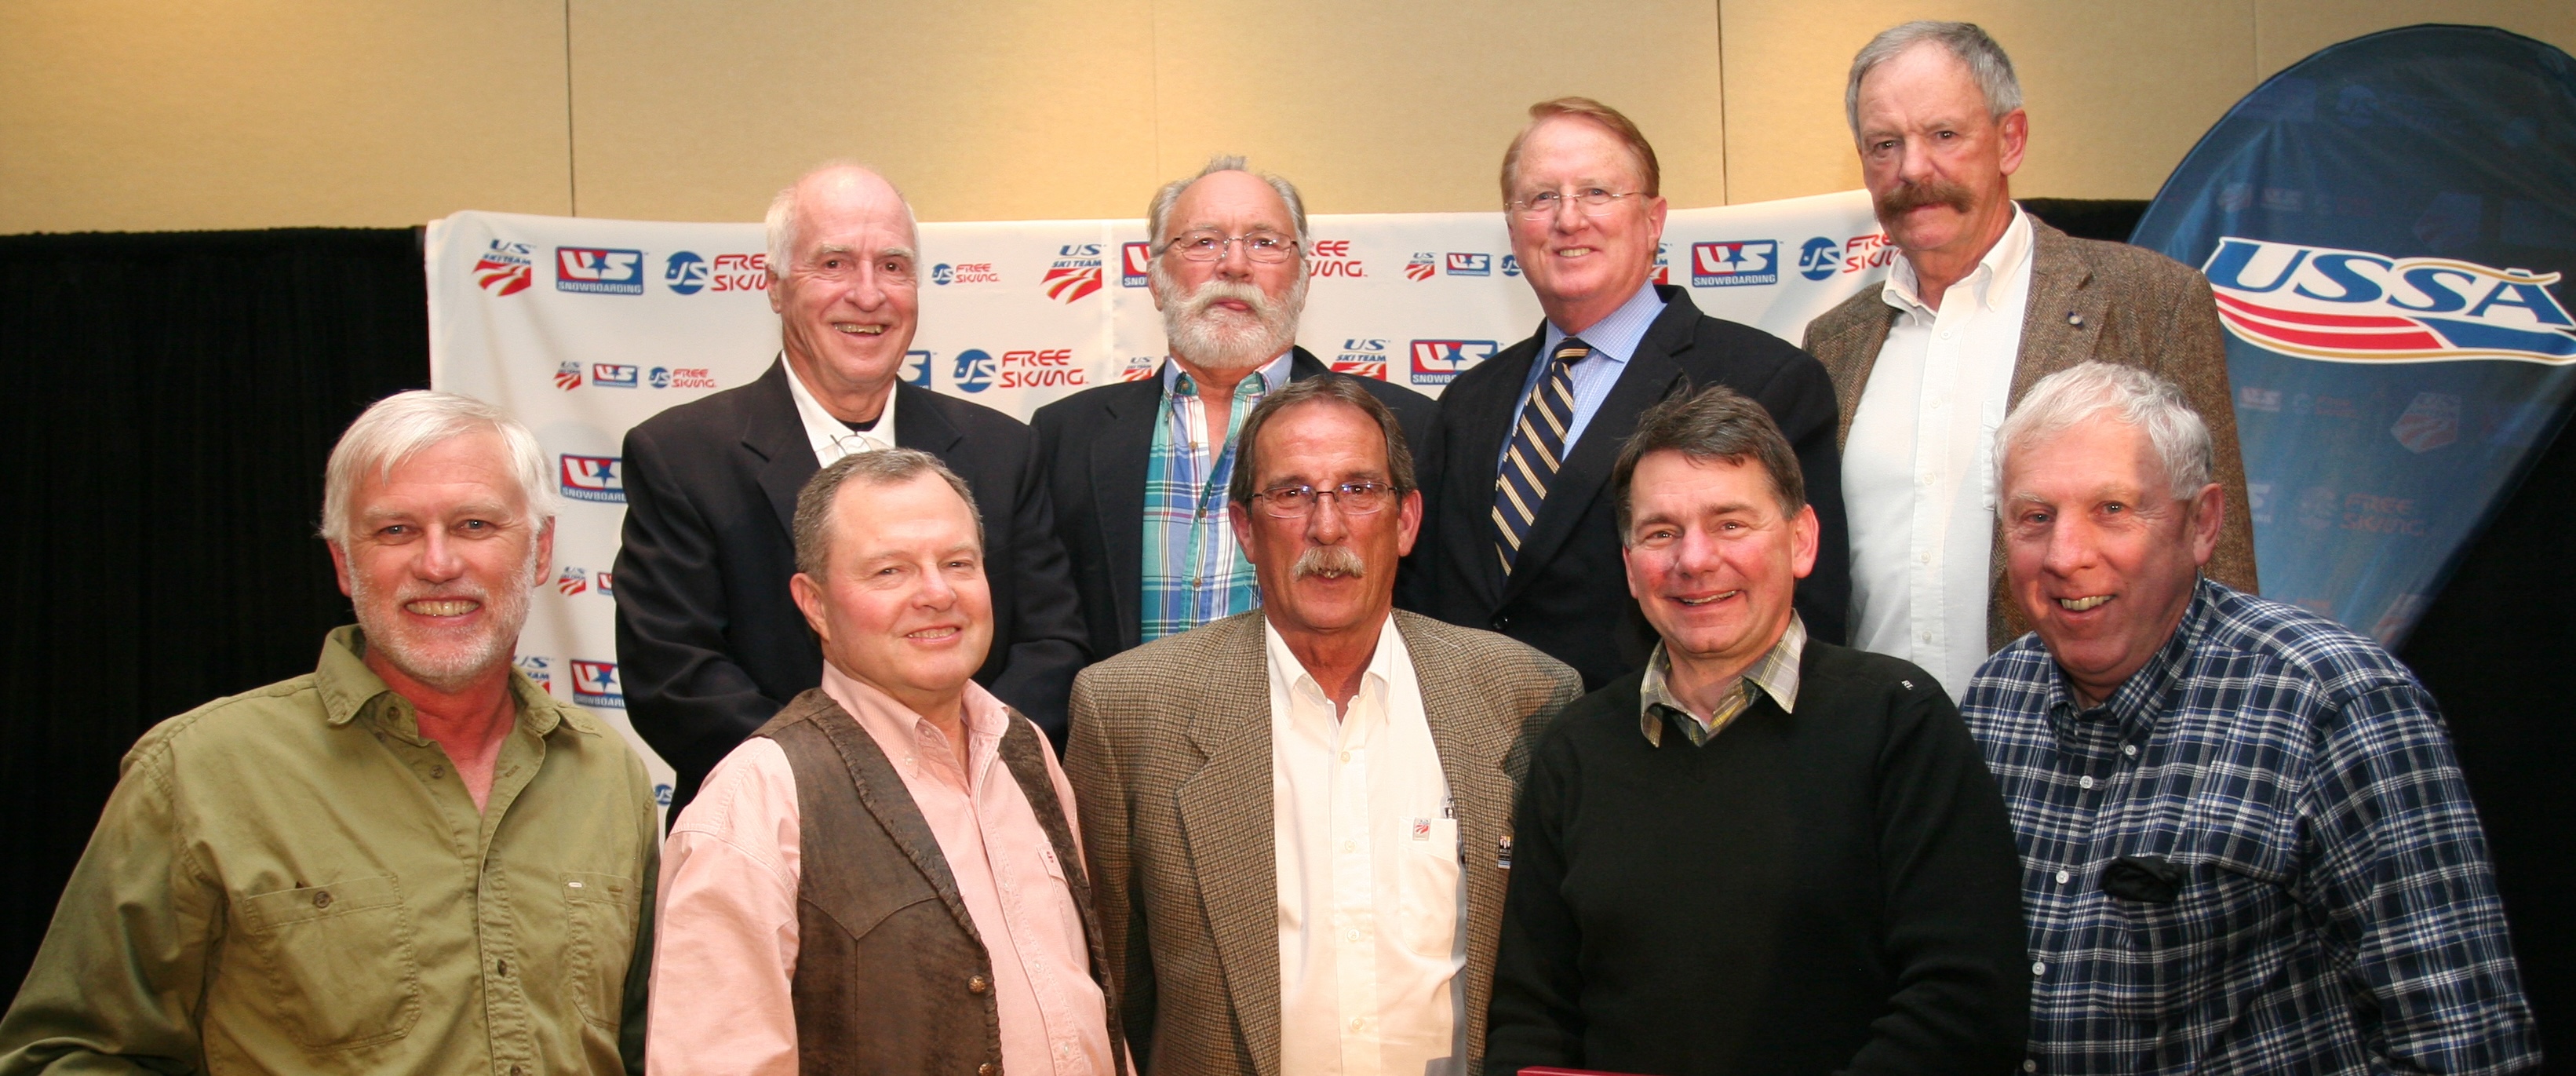 USSA’s Westhaven Award is given annually to recognize an outstanding USSA/FIS technical delegate. The donors of this award are Fraser and Teddy West. Pictured are all Westhaven recipients: Back row: Bill Slattery, Barry 'Bear' Bryant, Tom Winters, Ted Sutton Front row: Andy Hayes, Bruce Crane, Bob Dart, Jeff Lange, and Andy Wise USSA Chairman’s Awards Dinner, Friday, May 20, 2011, The Park City Marriott, Park City, UT Photo: Sarah Ely/USSA